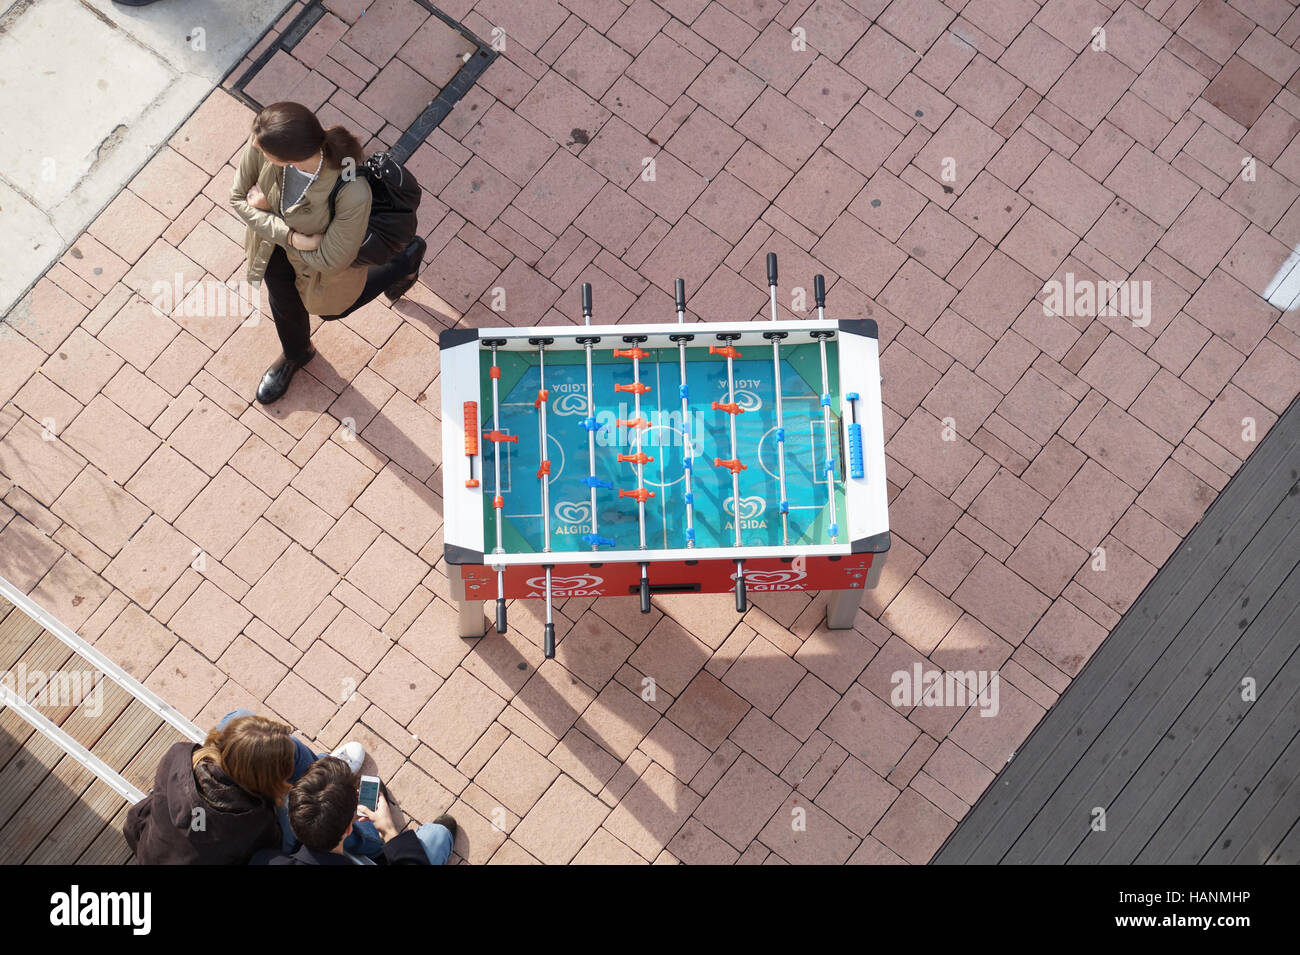 Foosball table. Top view Stock Photo